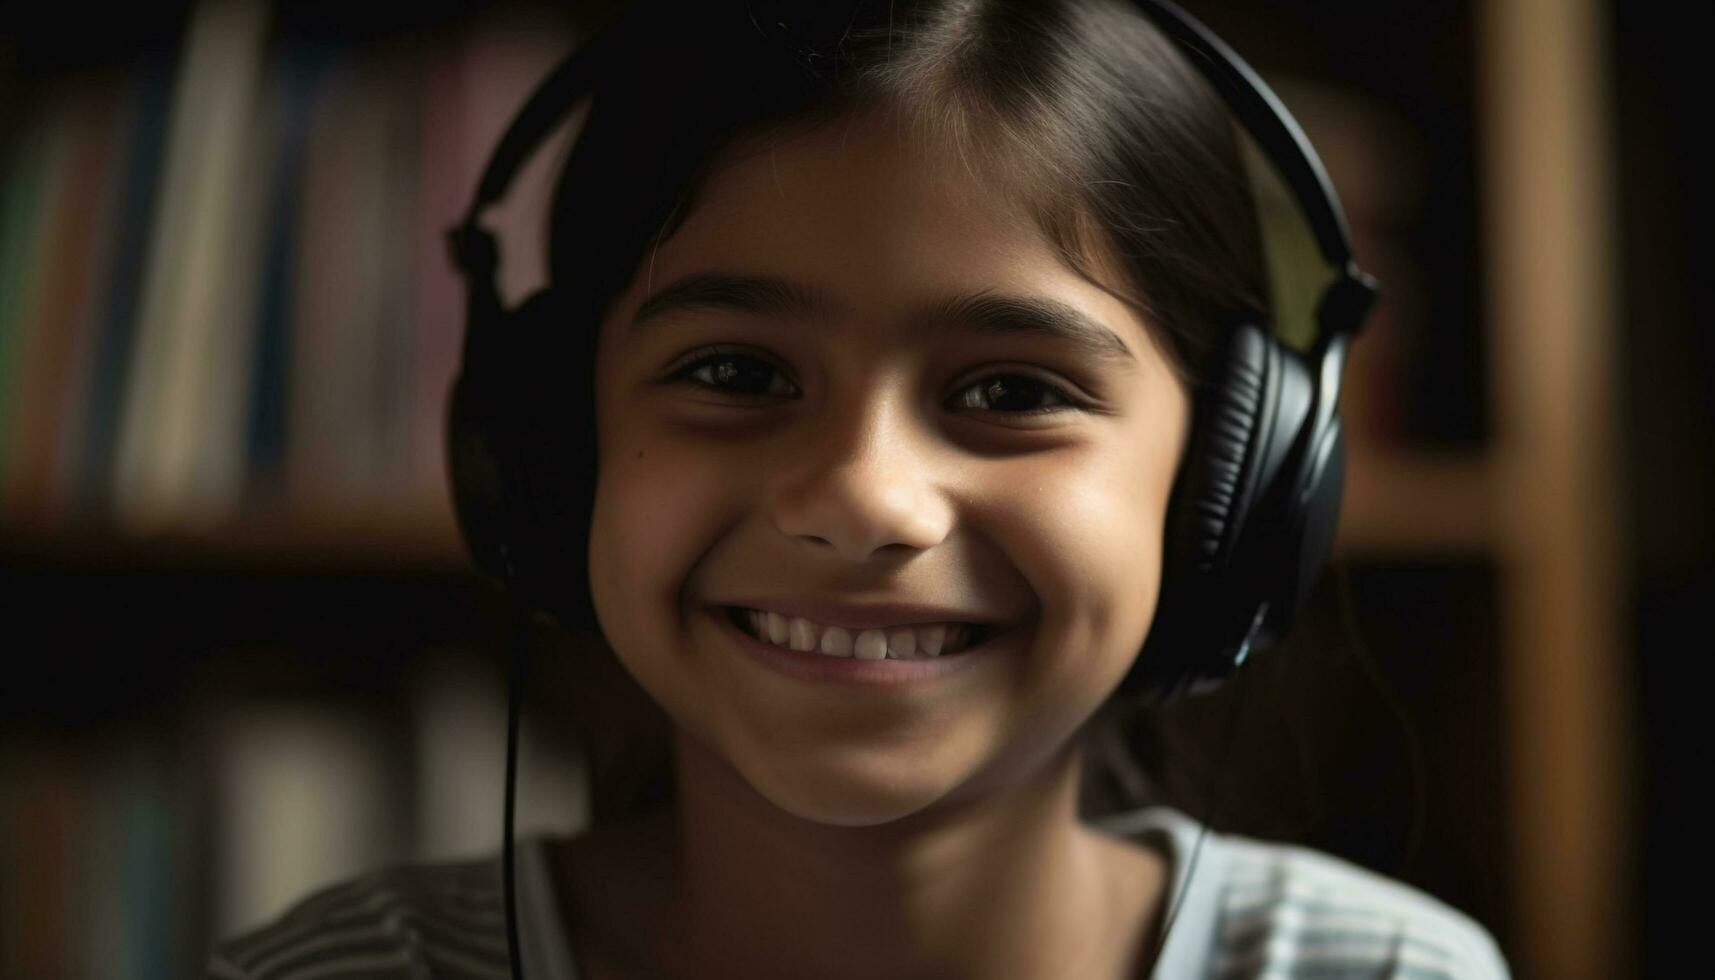 Smiling child listening, looking at camera, cute portrait of happiness generated by AI photo